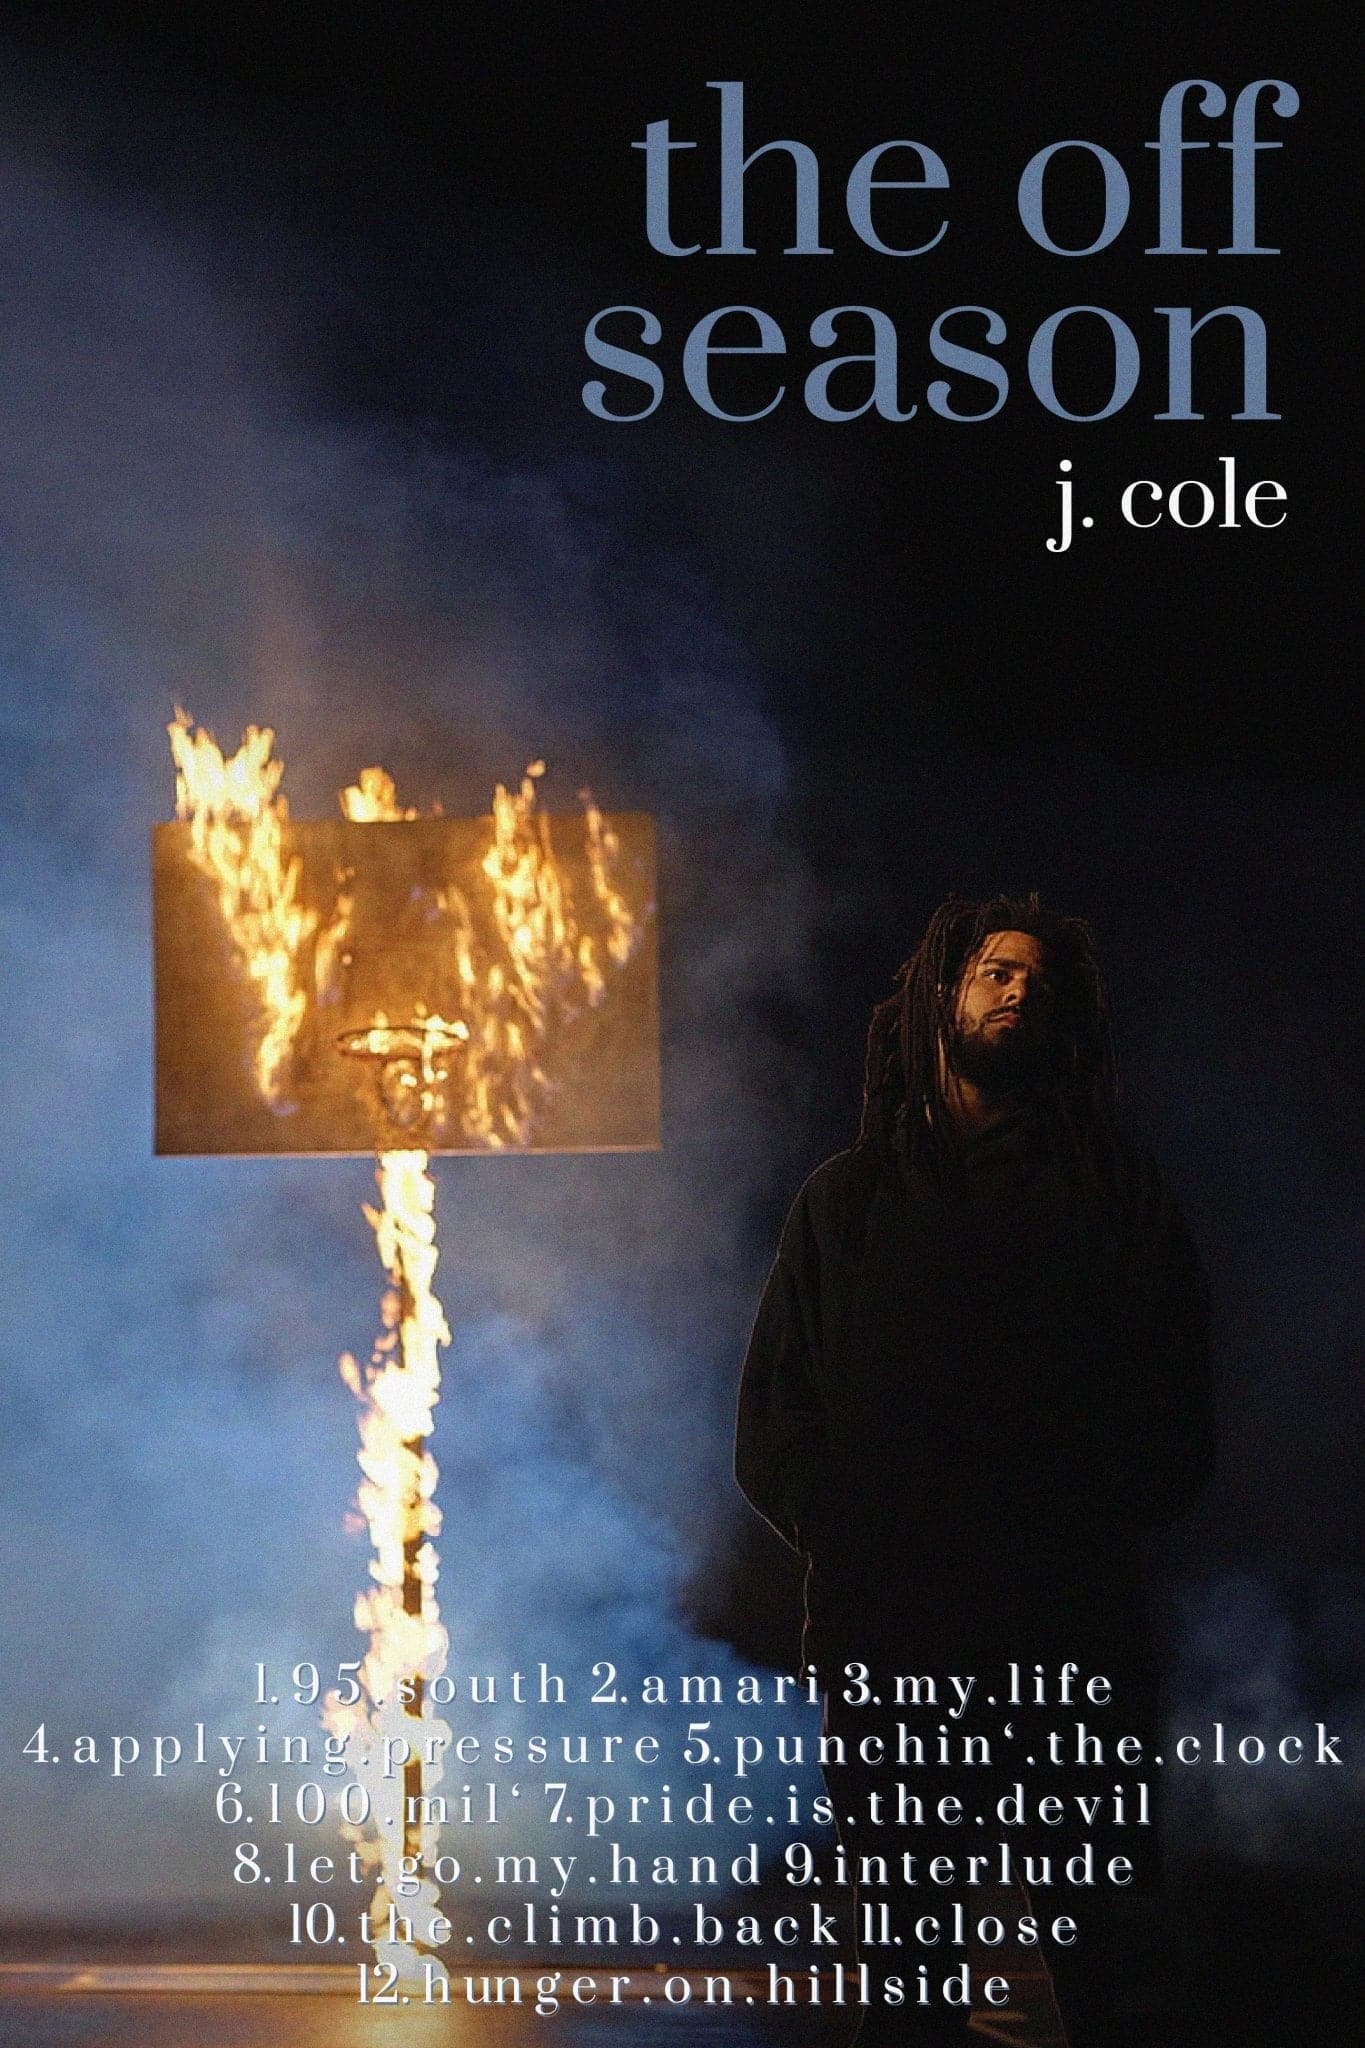 J. Cole '90s The Off Season Tracklist' Poster - Posters Plug